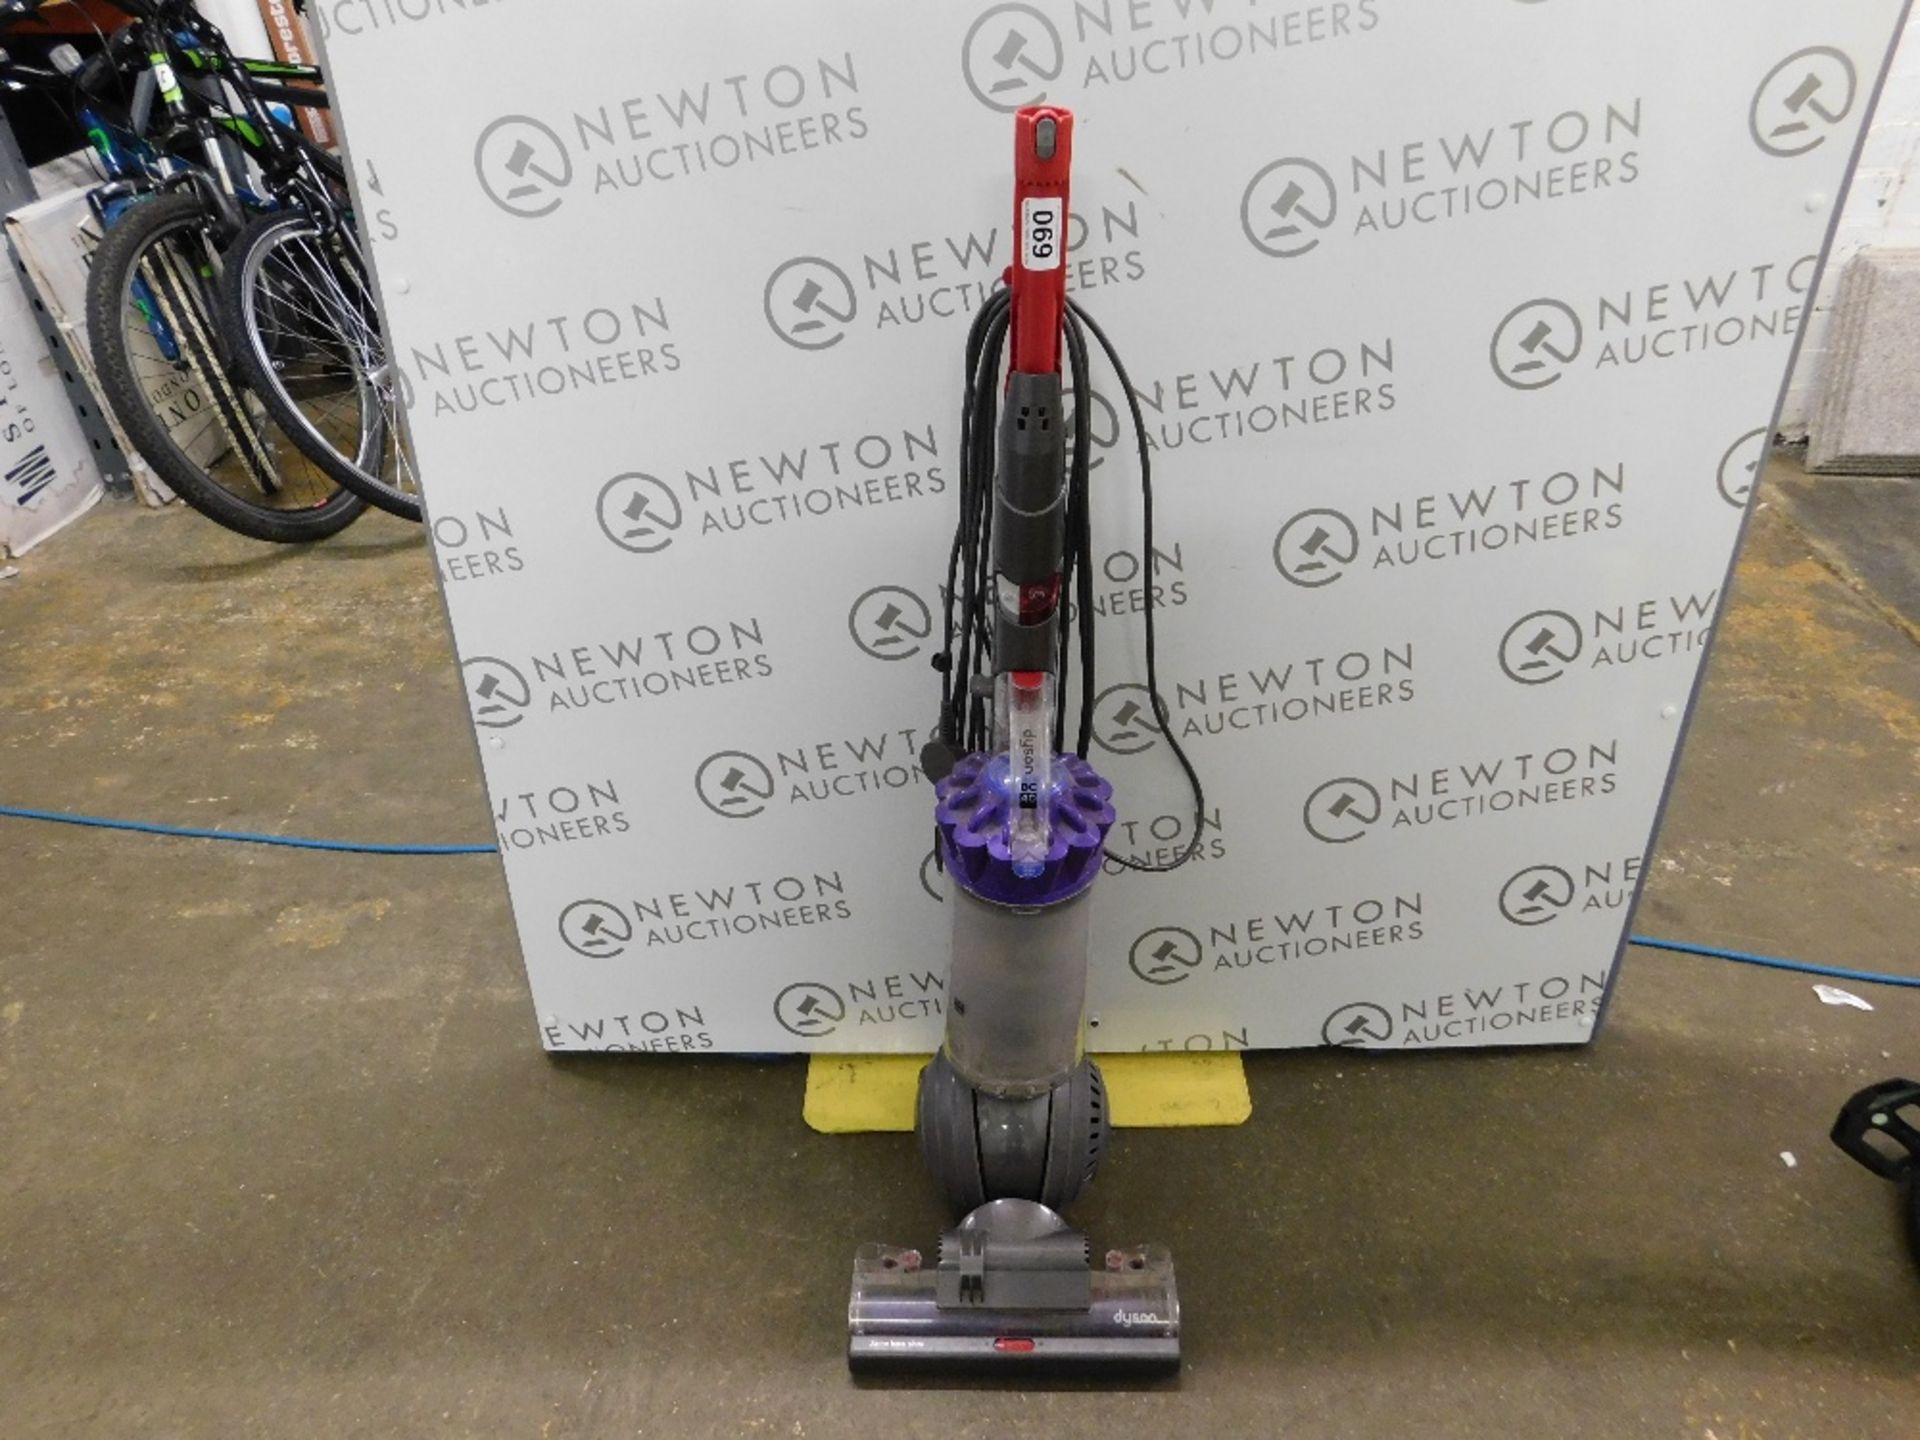 1 DYSON DC40 ANIMAL BALL VACUUM CLEANER RRP £389.99